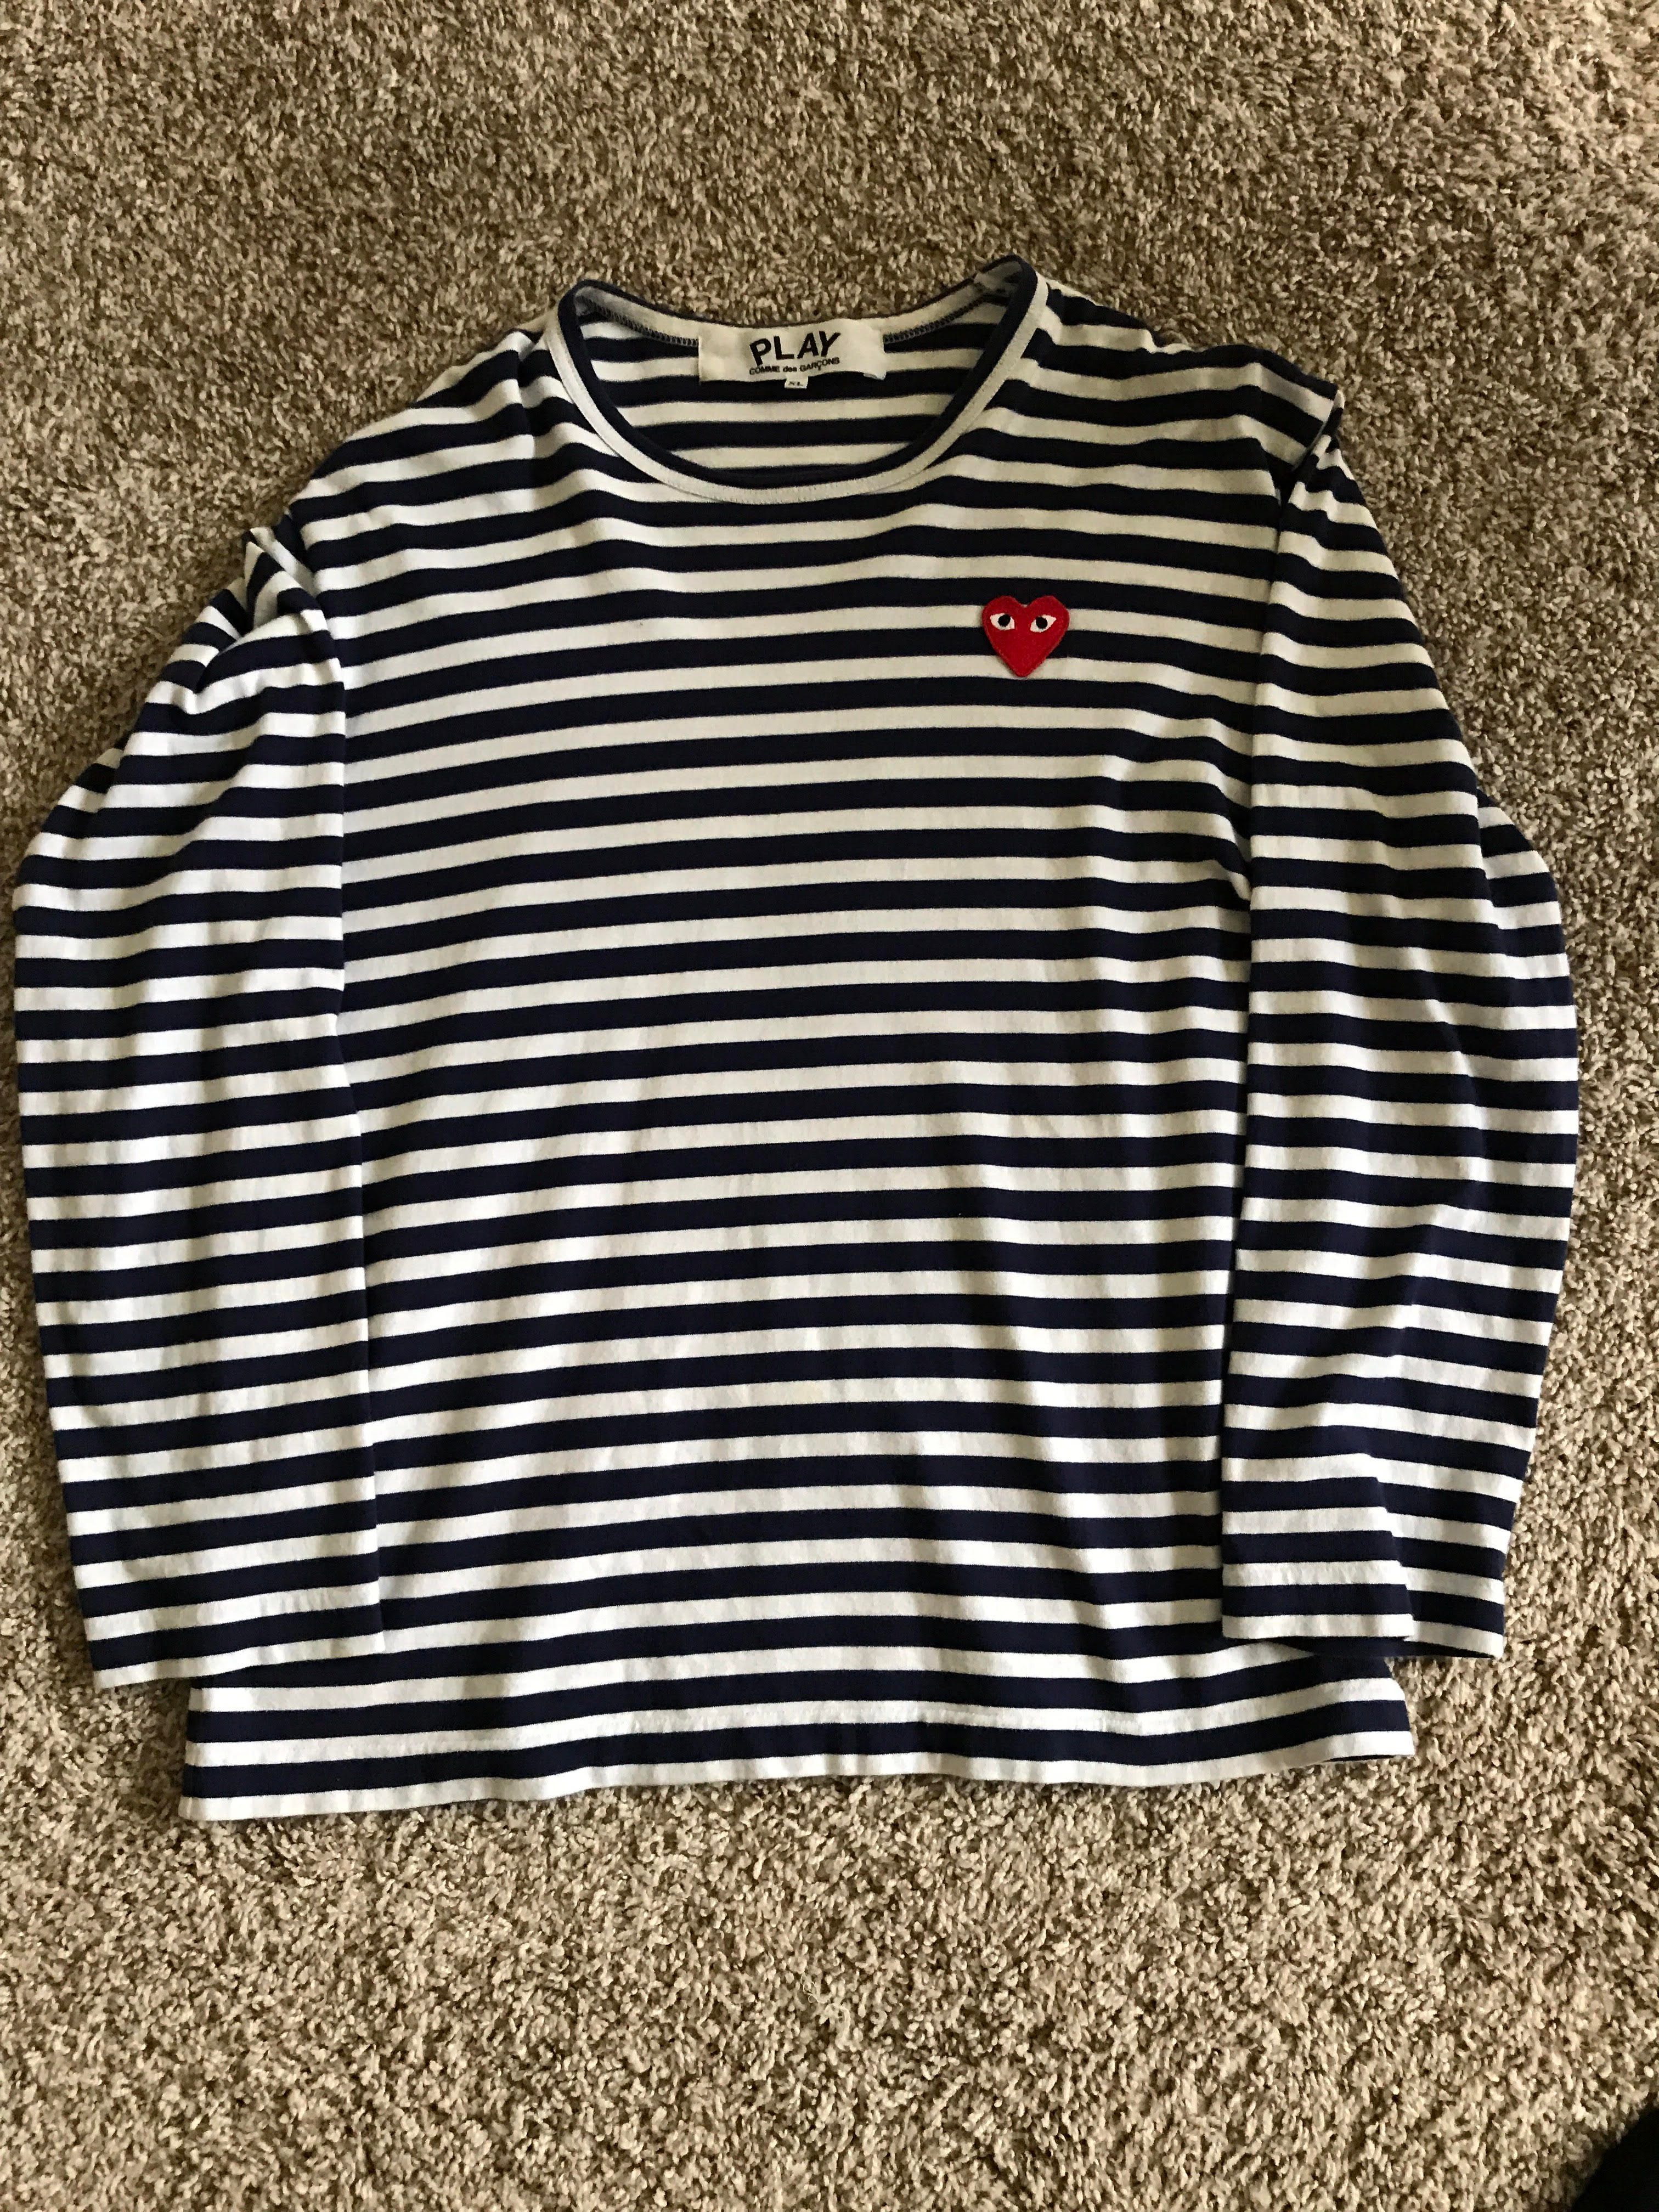 Comme Des Garcons Play Striped Longsleeve (Navy/White)